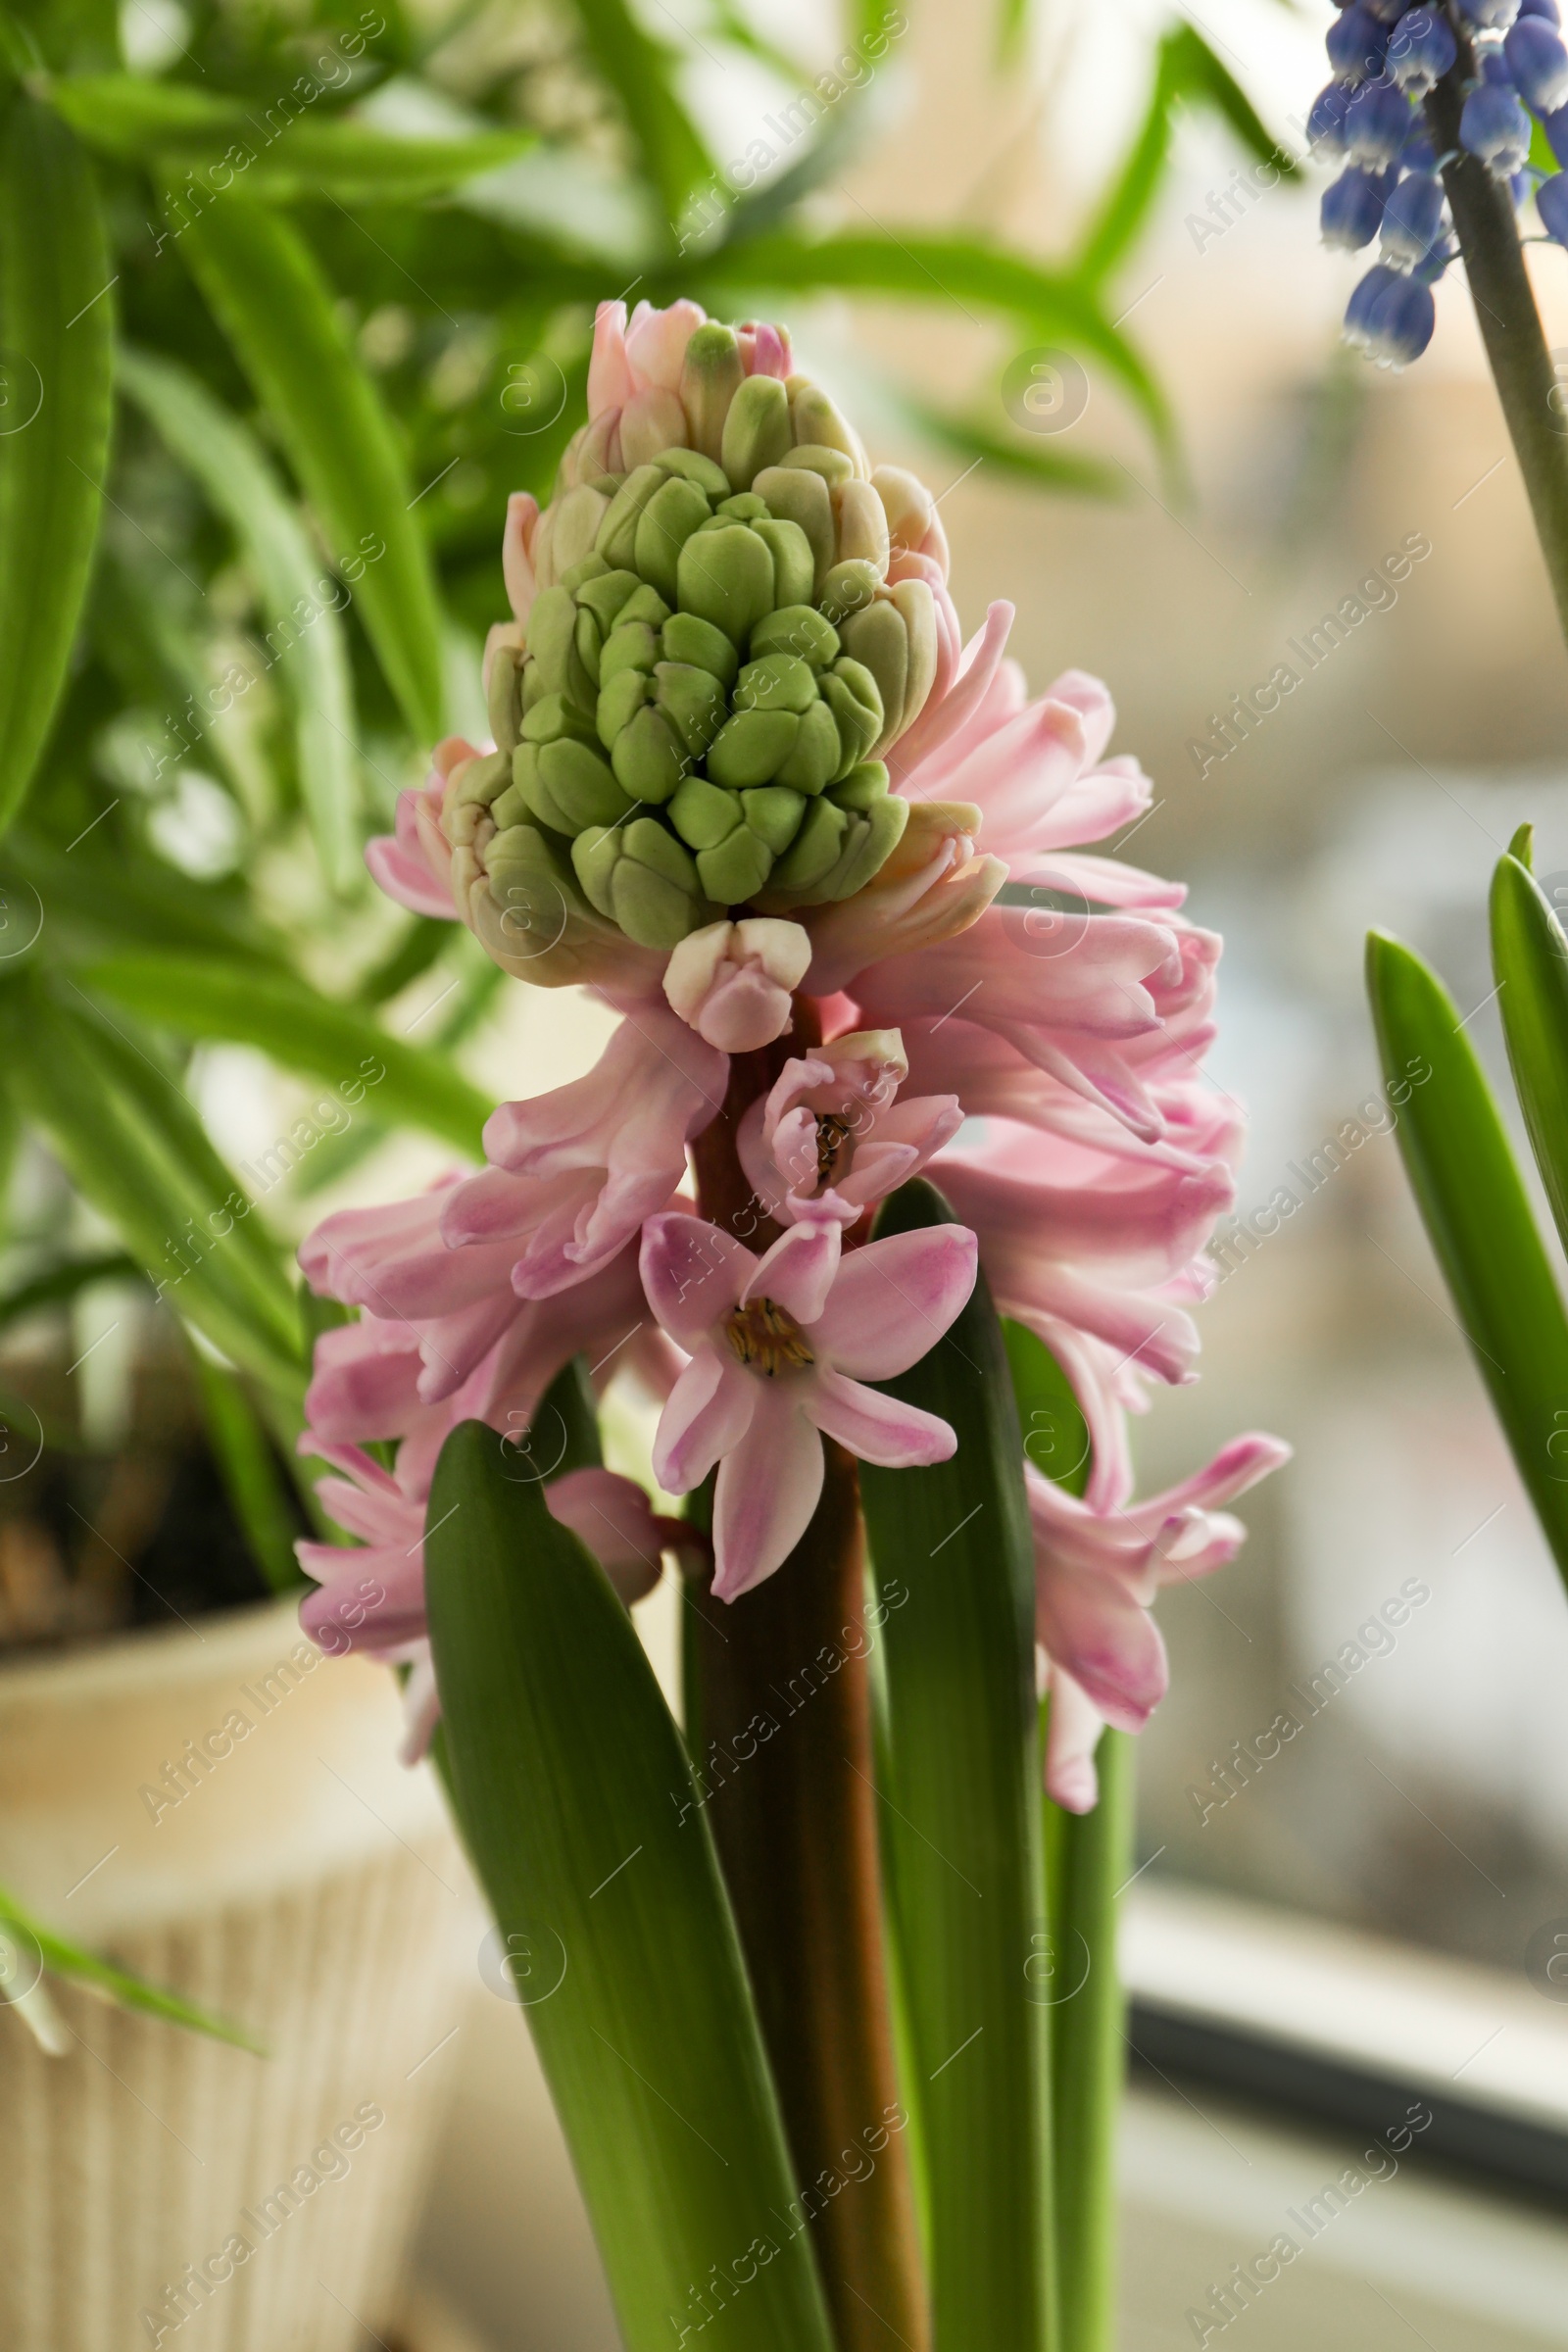 Photo of Beautiful hyacinth flower on window sill indoors, closeup. Spring time